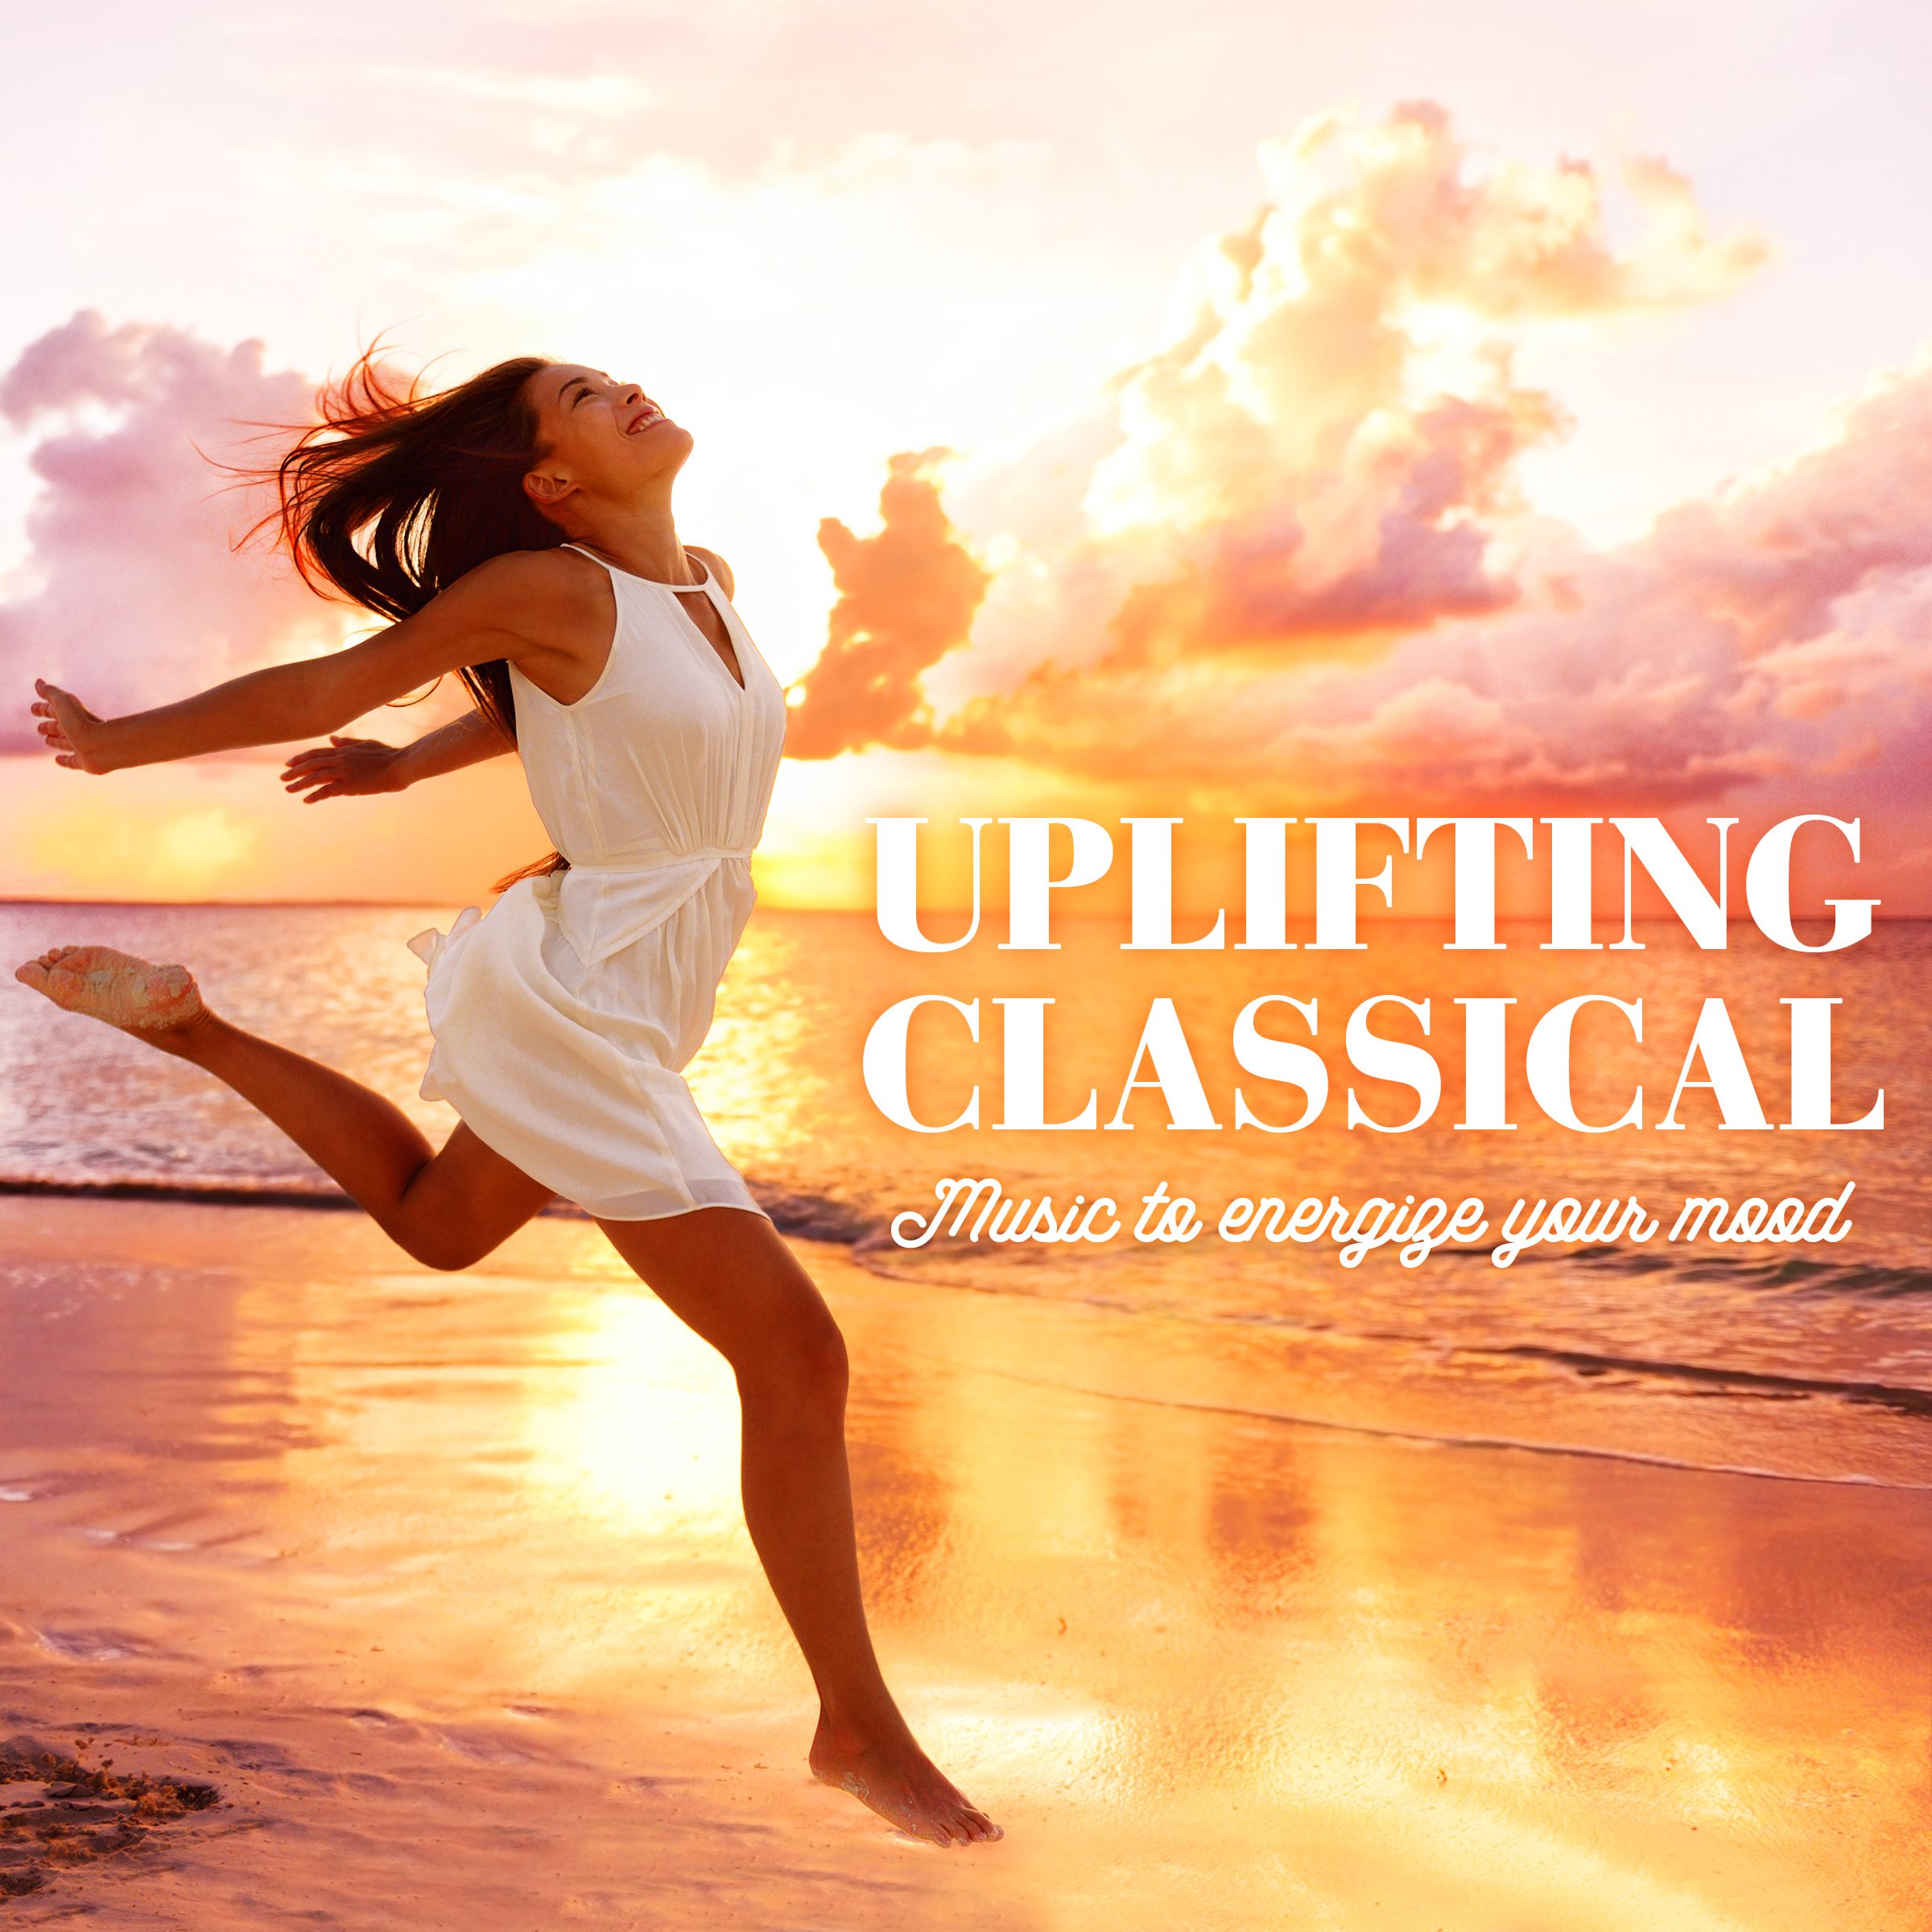 Uplifting Classical - Music to energize your mood